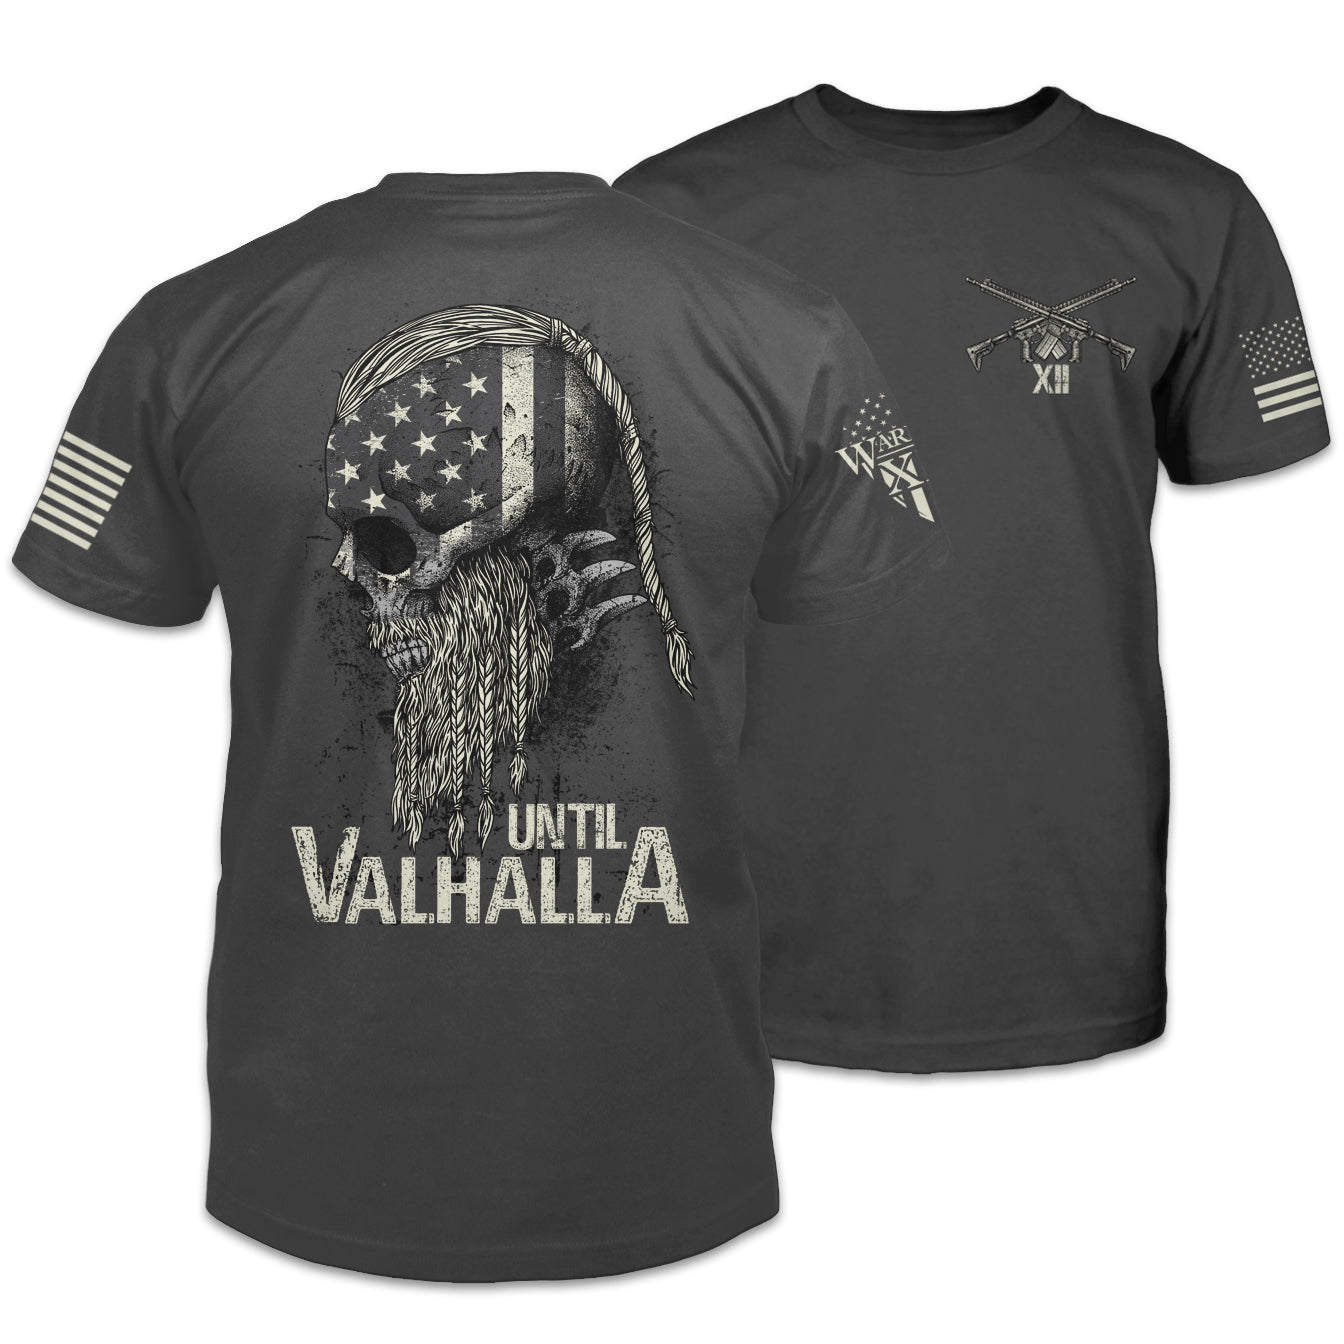 Front & back dark grey t-shirt with the words "Until Valhalla" and a side view of a viking printed on the shirt.